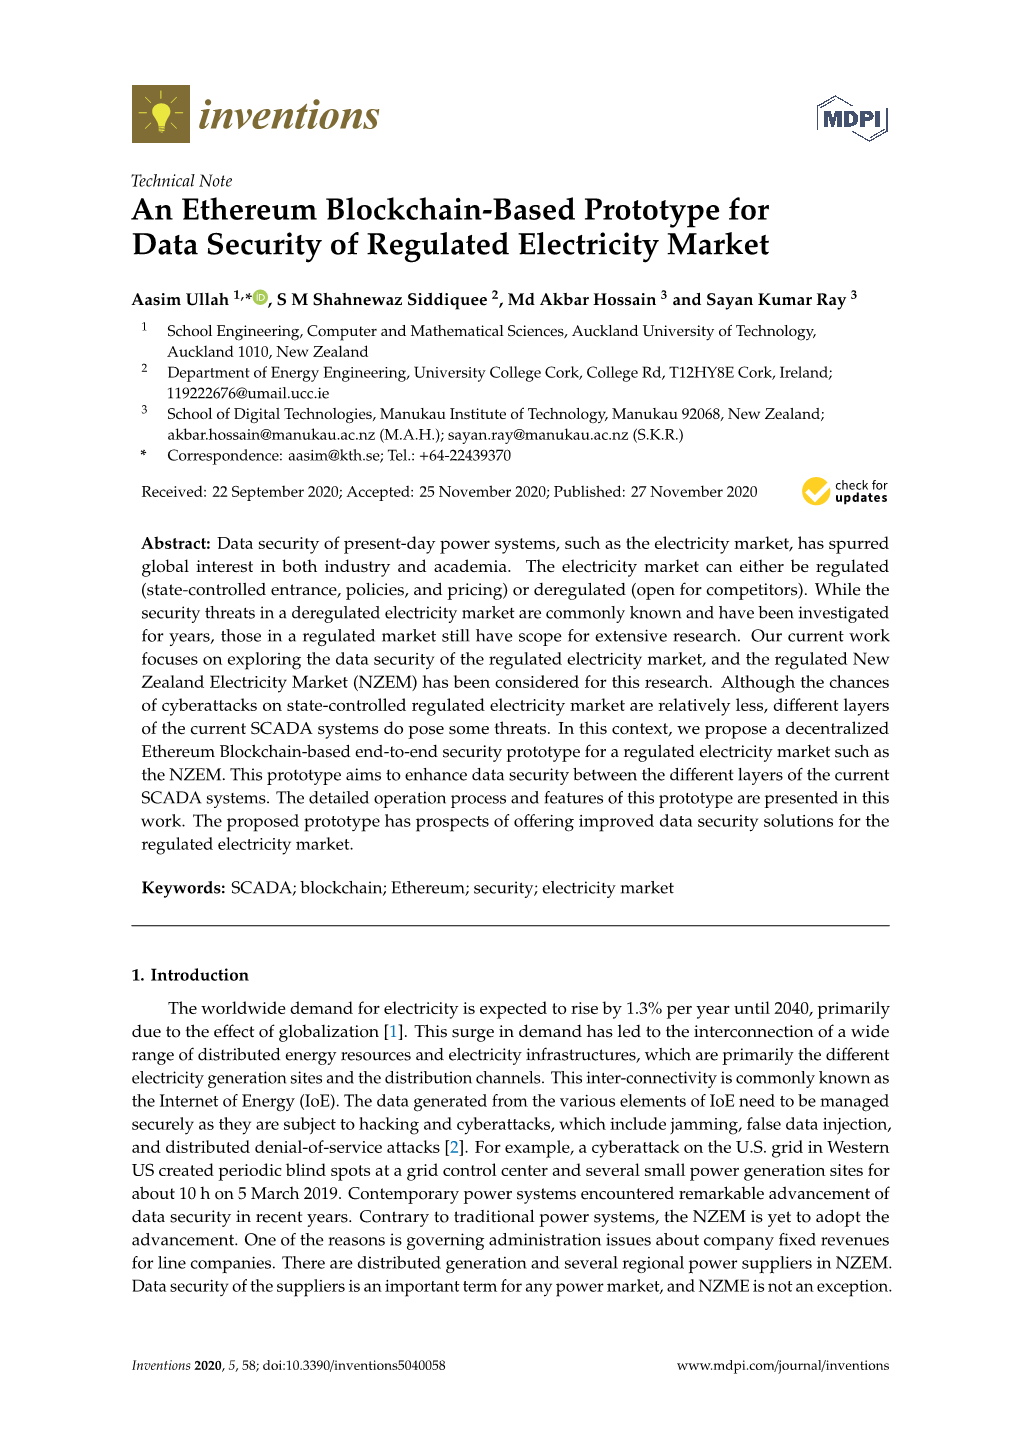 An Ethereum Blockchain-Based Prototype for Data Security of Regulated Electricity Market